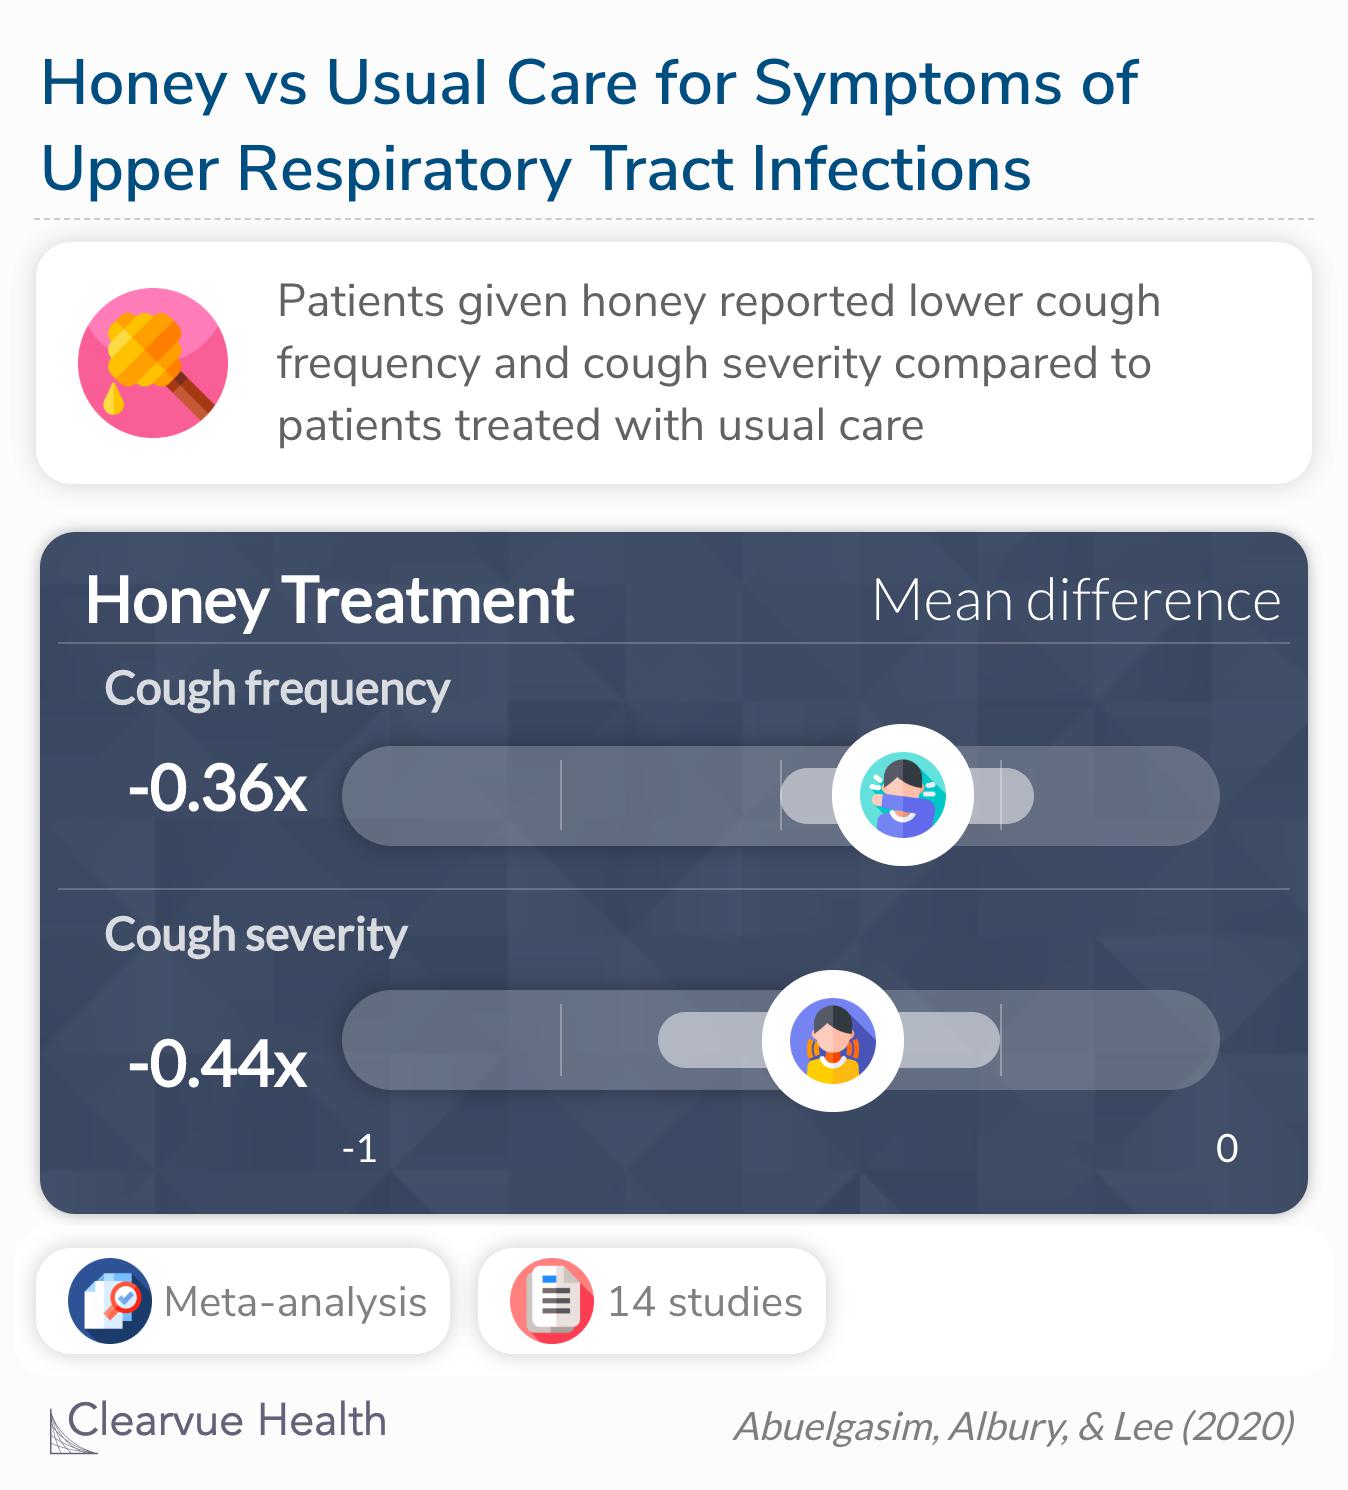 Honey was superior to usual care for the improvement of symptoms of upper respiratory tract infections. 